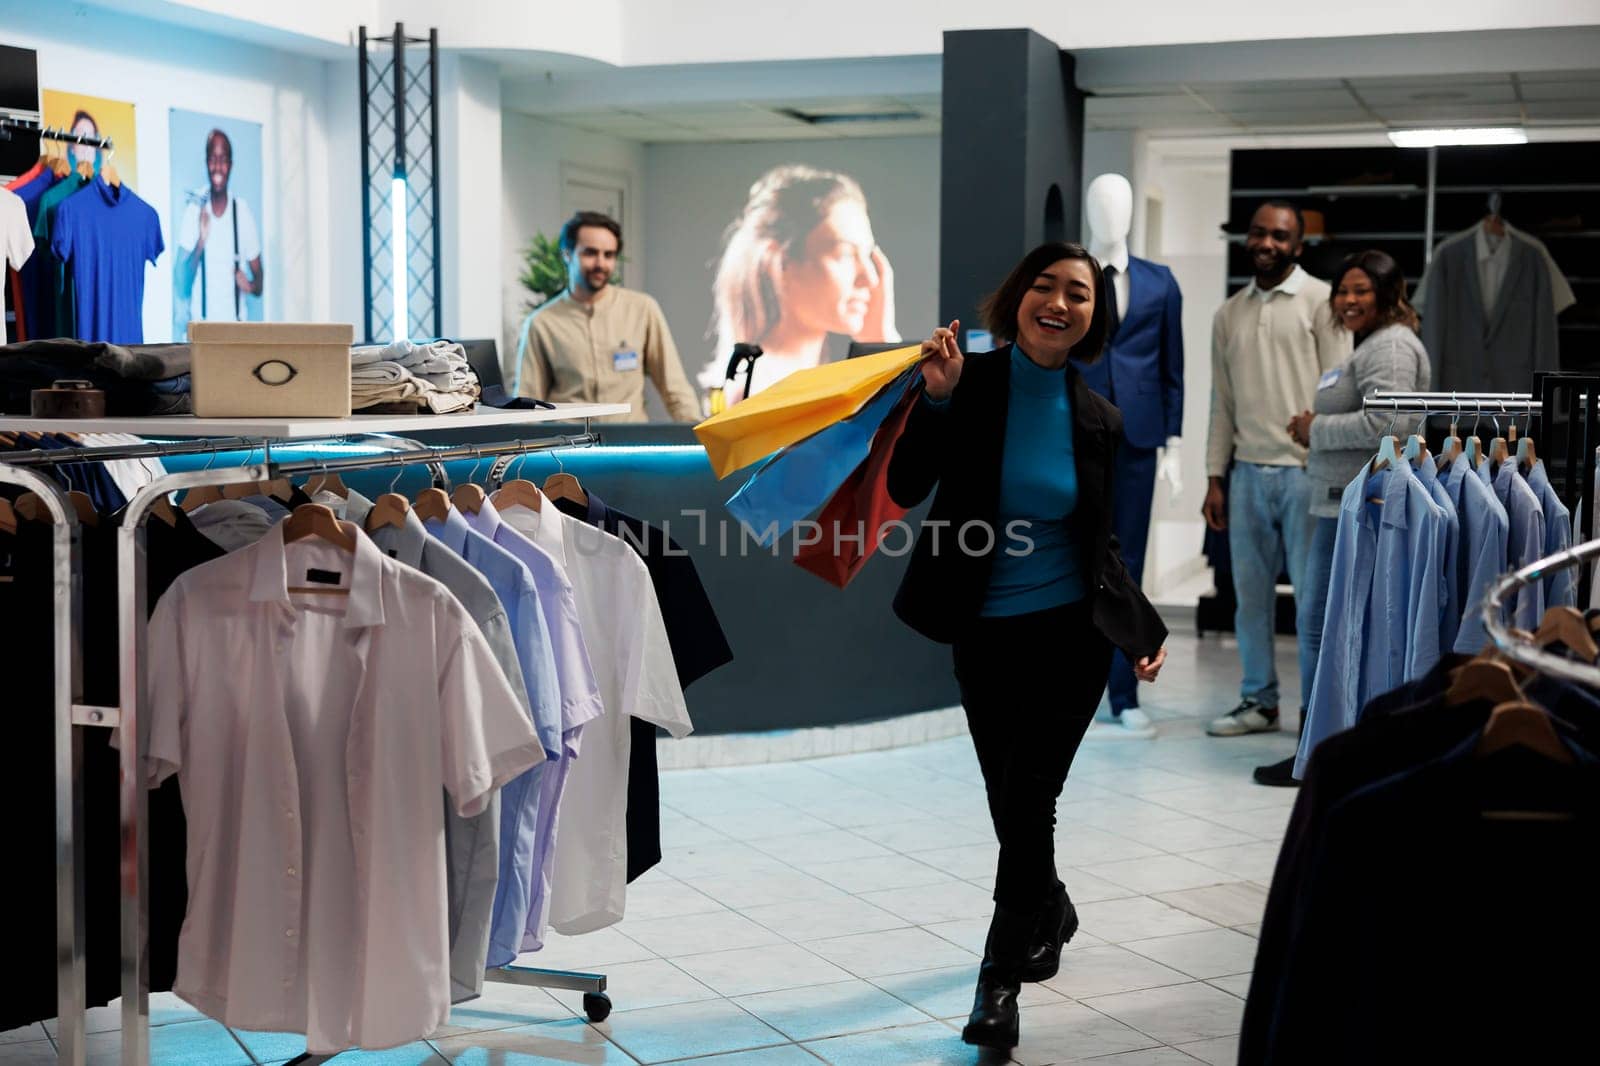 Customer walking with shopping bags by DCStudio